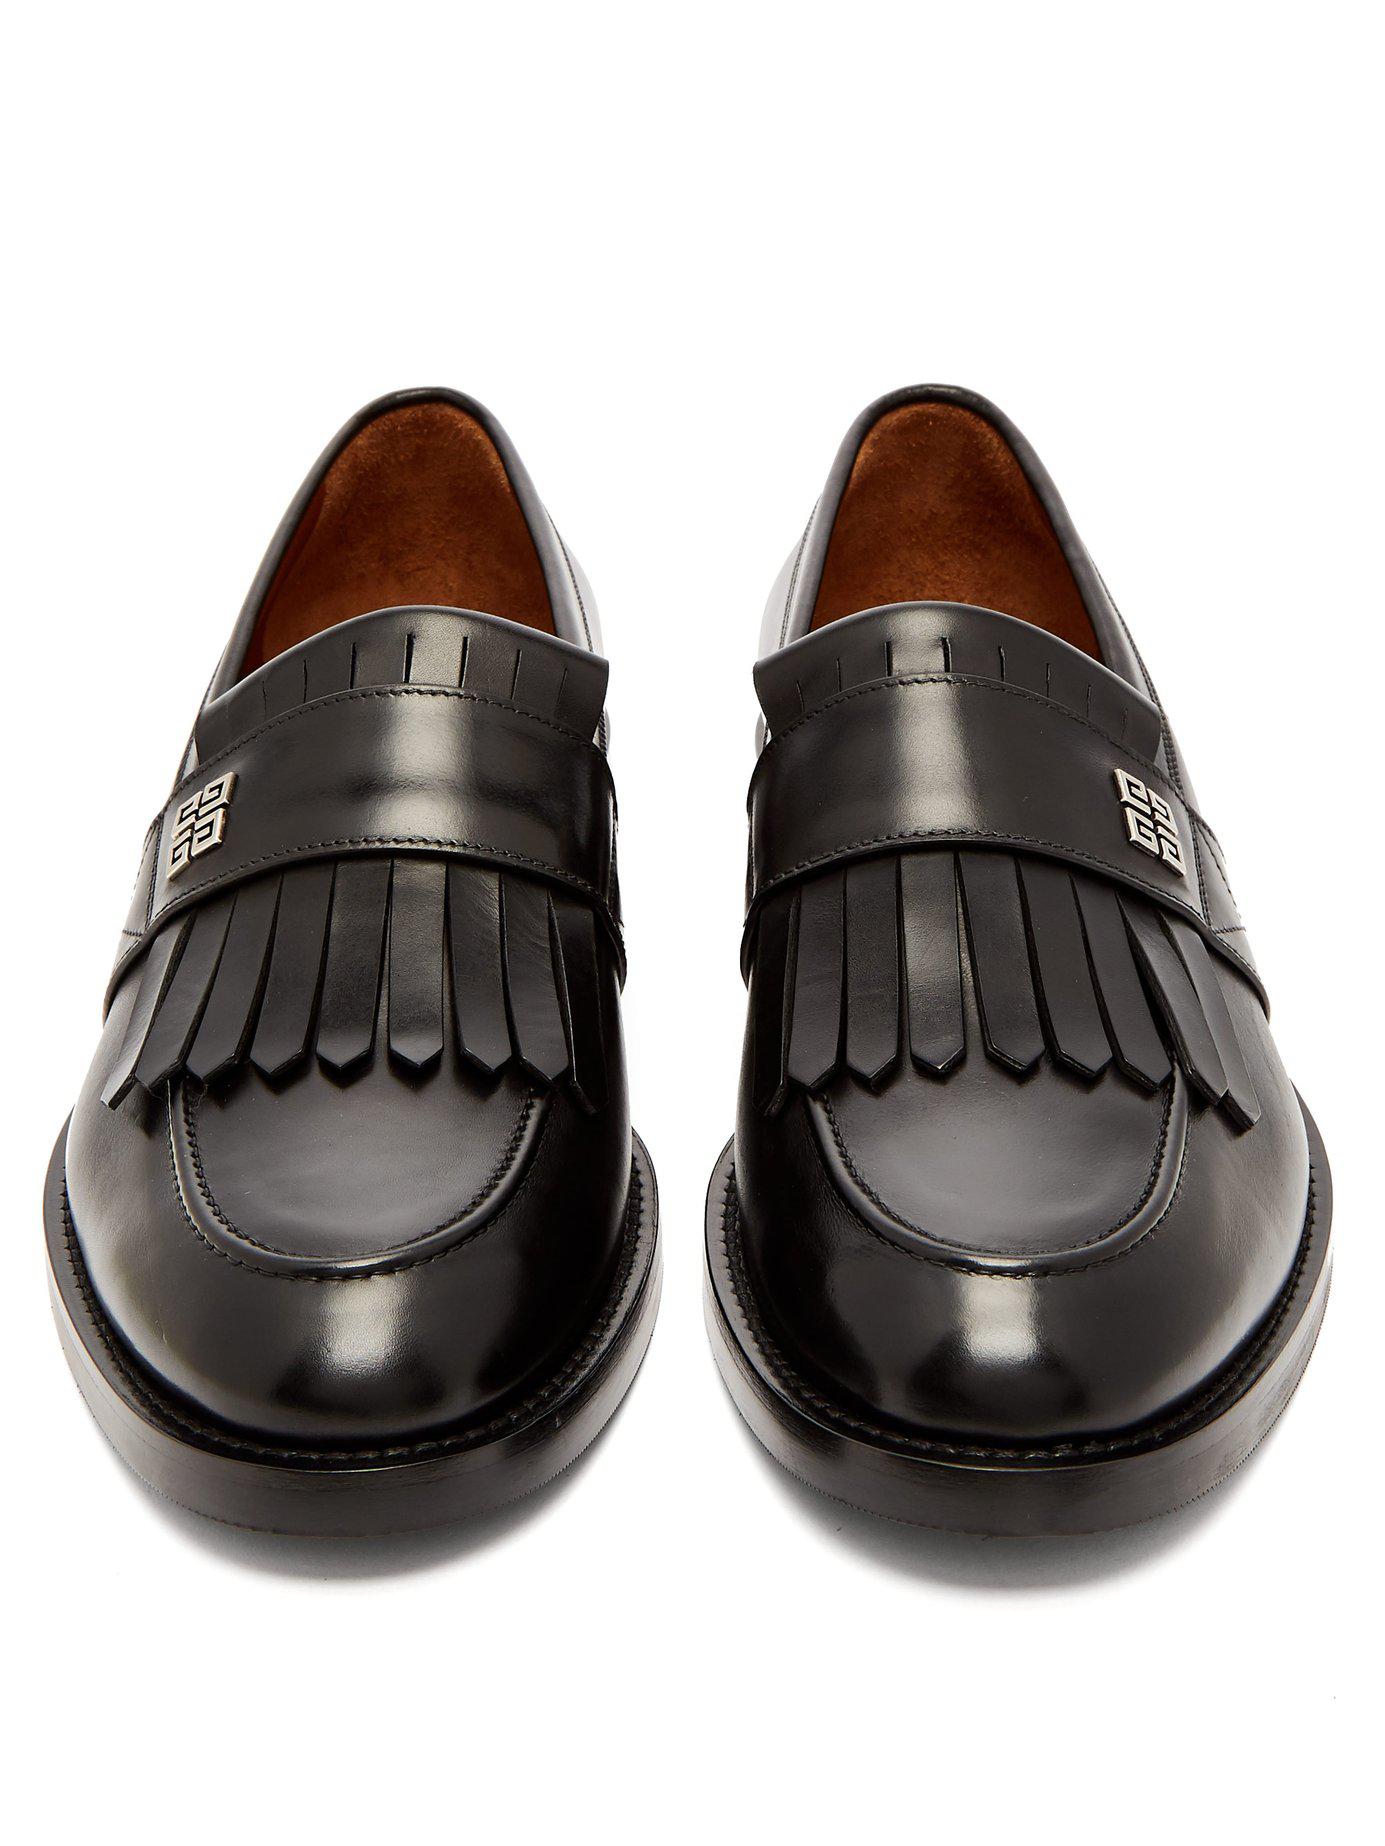 Givenchy 4g Logo Fringed Leather Loafers in Black for Men - Lyst